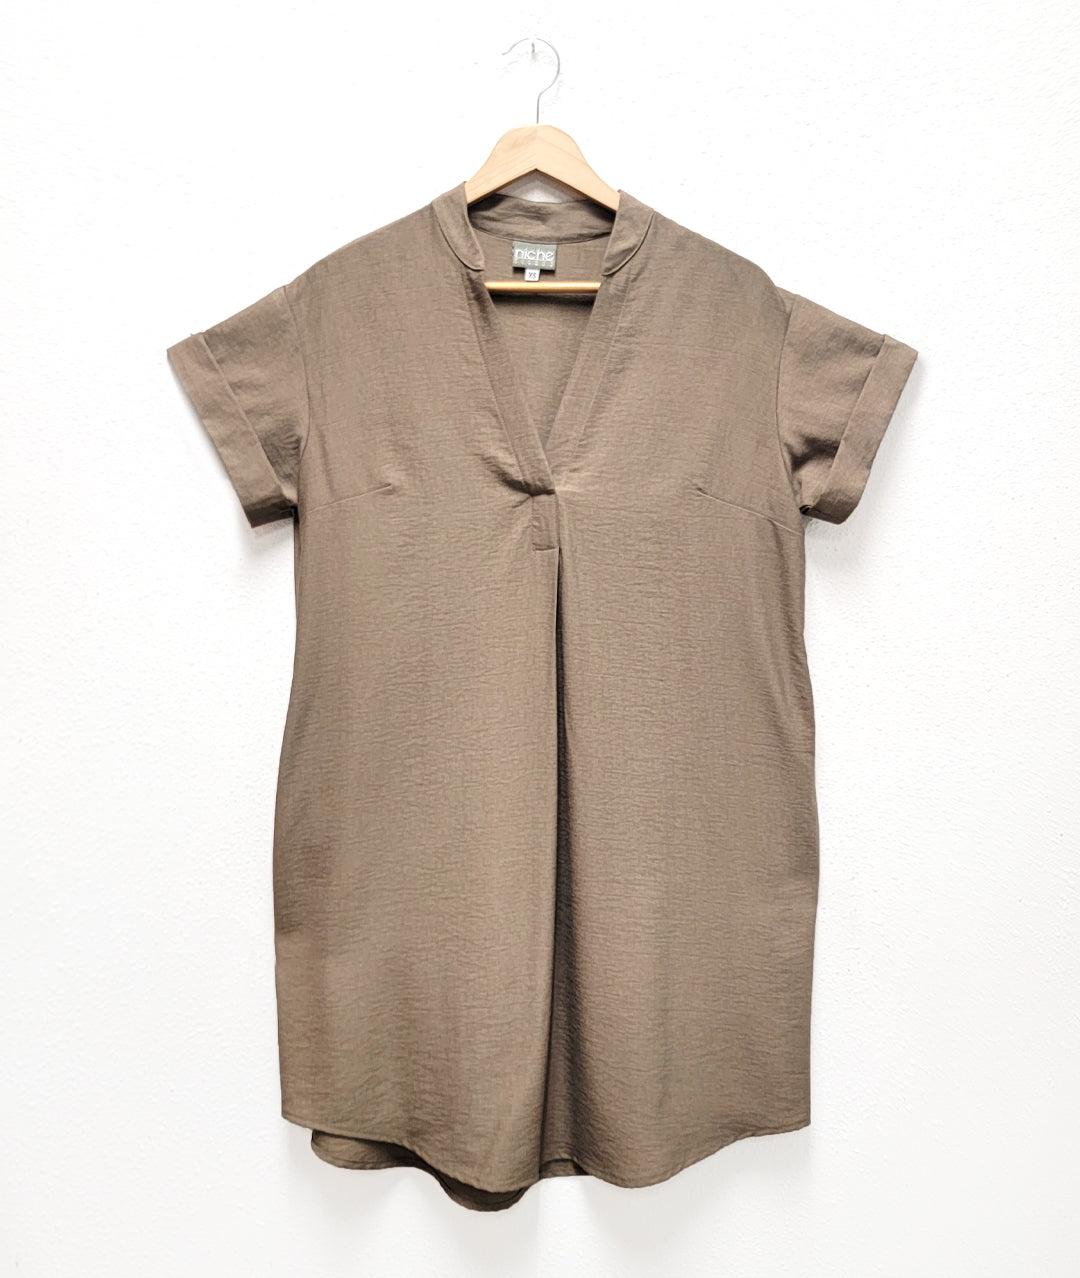 boxy pebble brown dress with short cuffed sleeves and a vneck